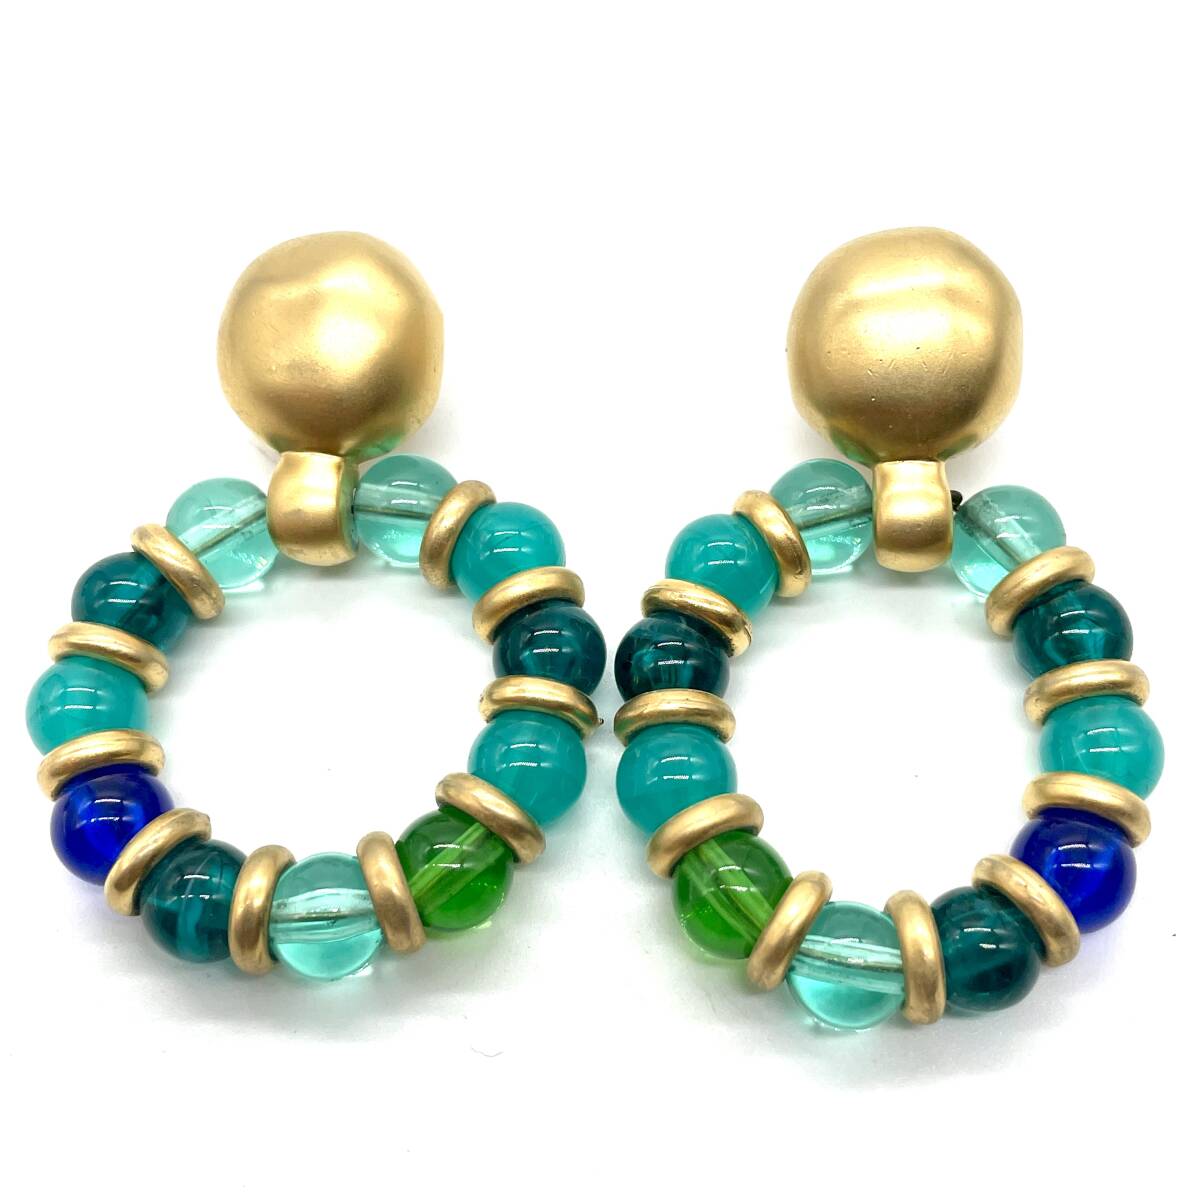 GIVENCHY Givenchy earrings Vintage multi color stone Gold colorful costume jewelry brand accessory 